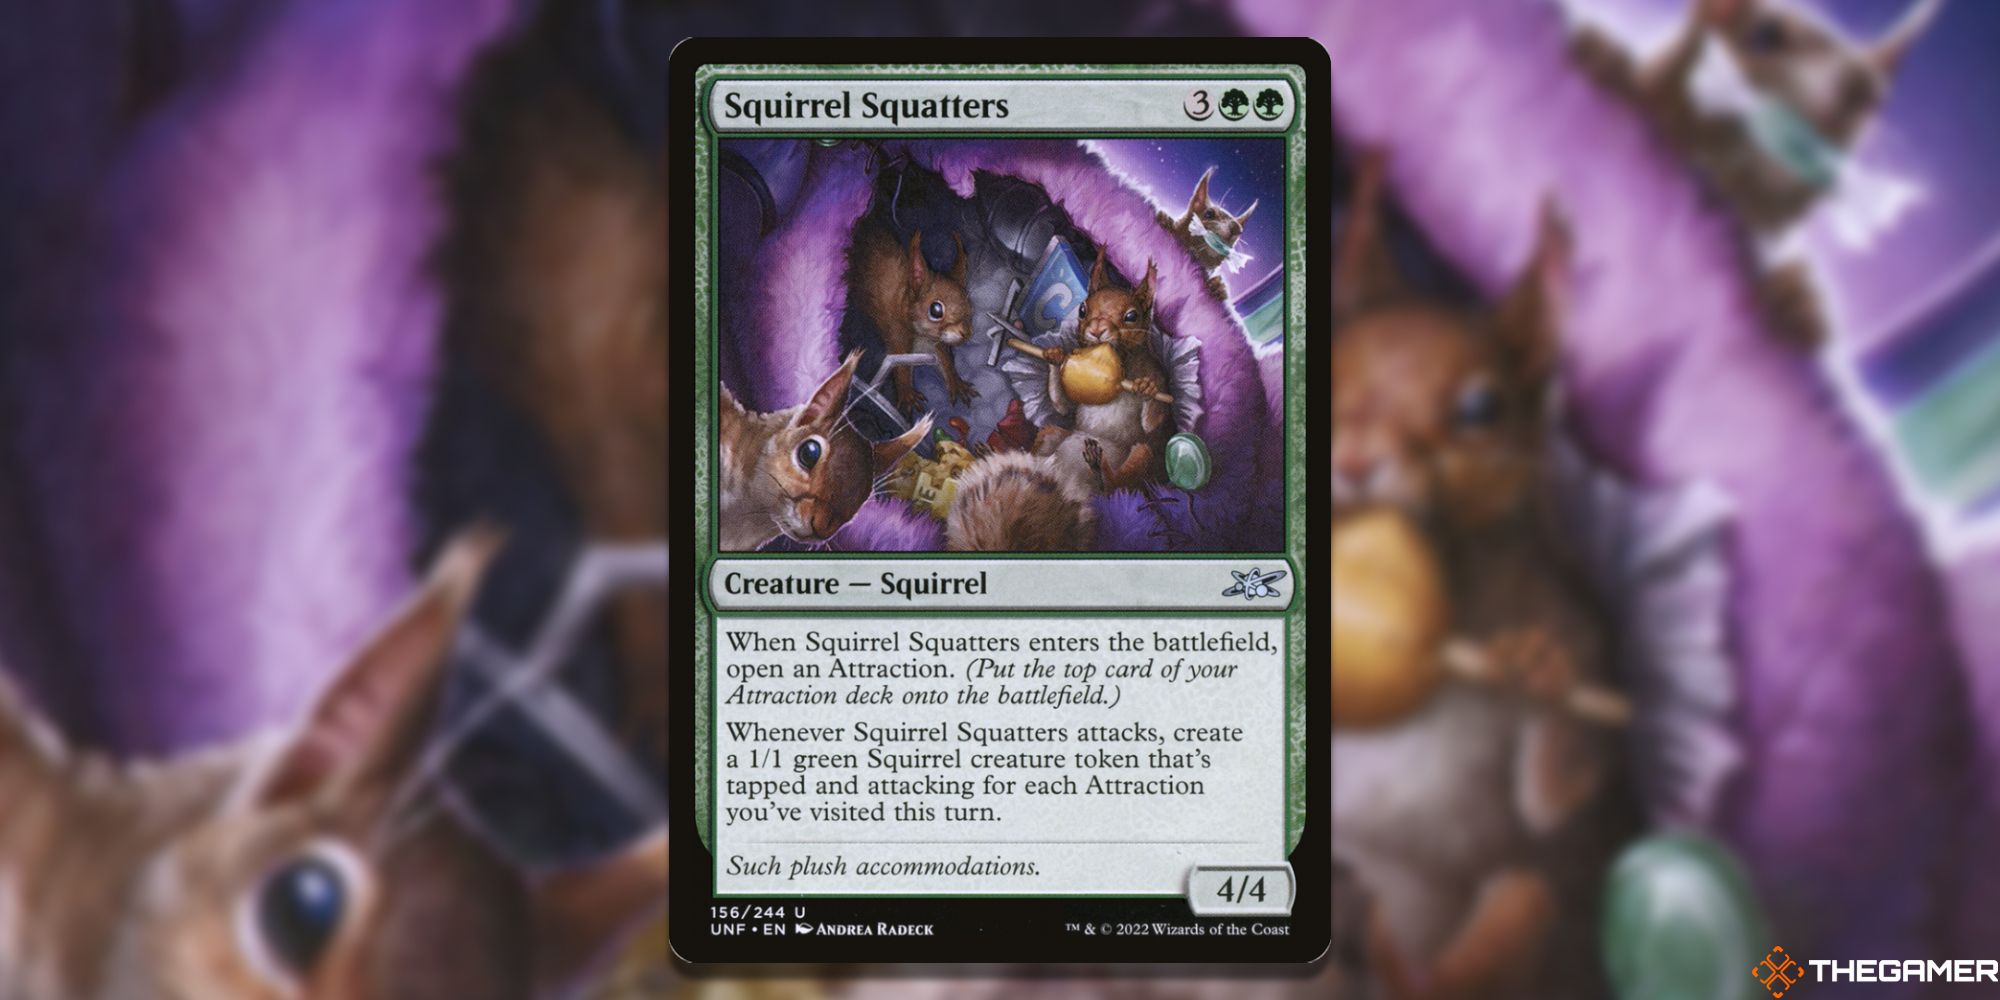 Image of the Squirrel Squatters card in Magic: The Gathering, with art by Andrea Radeck